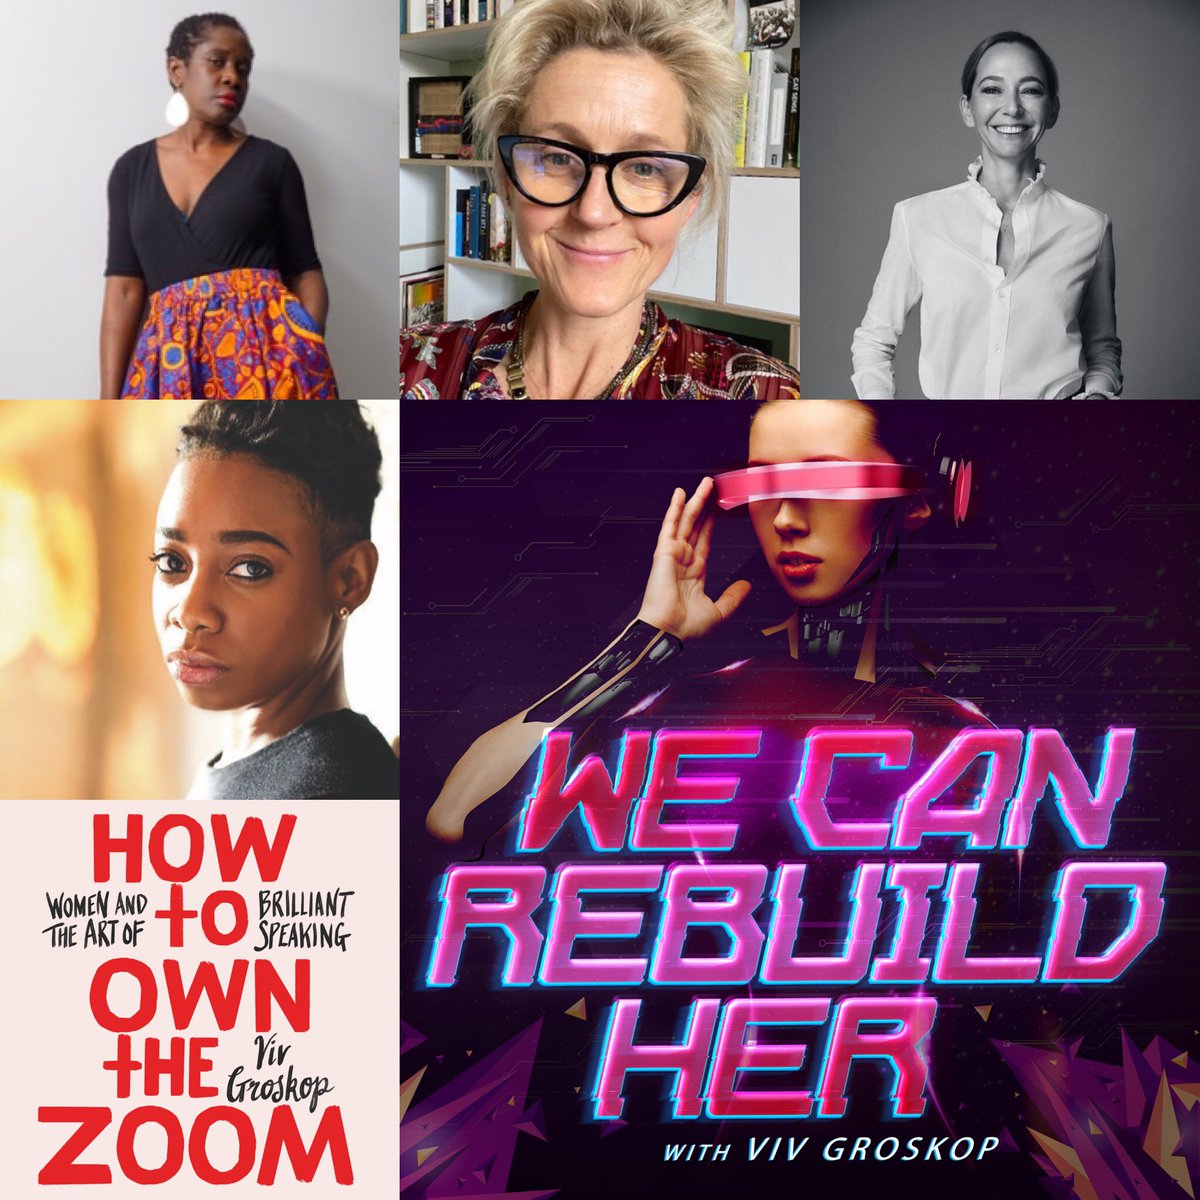 🎧📢 Post-lockdown double podcast extravaganza! Be ready for the new world... Be inspired... HOW TO OWN THE ZOOM out now: podfollow.com/how-to-own-the… PLUS new brand podcast WE CAN REBUILD HER with @Marthalanefox @AmplifyDot @Kemitelford @theflowerbx: wecanrebuildher.libsyn.com 📢🎧